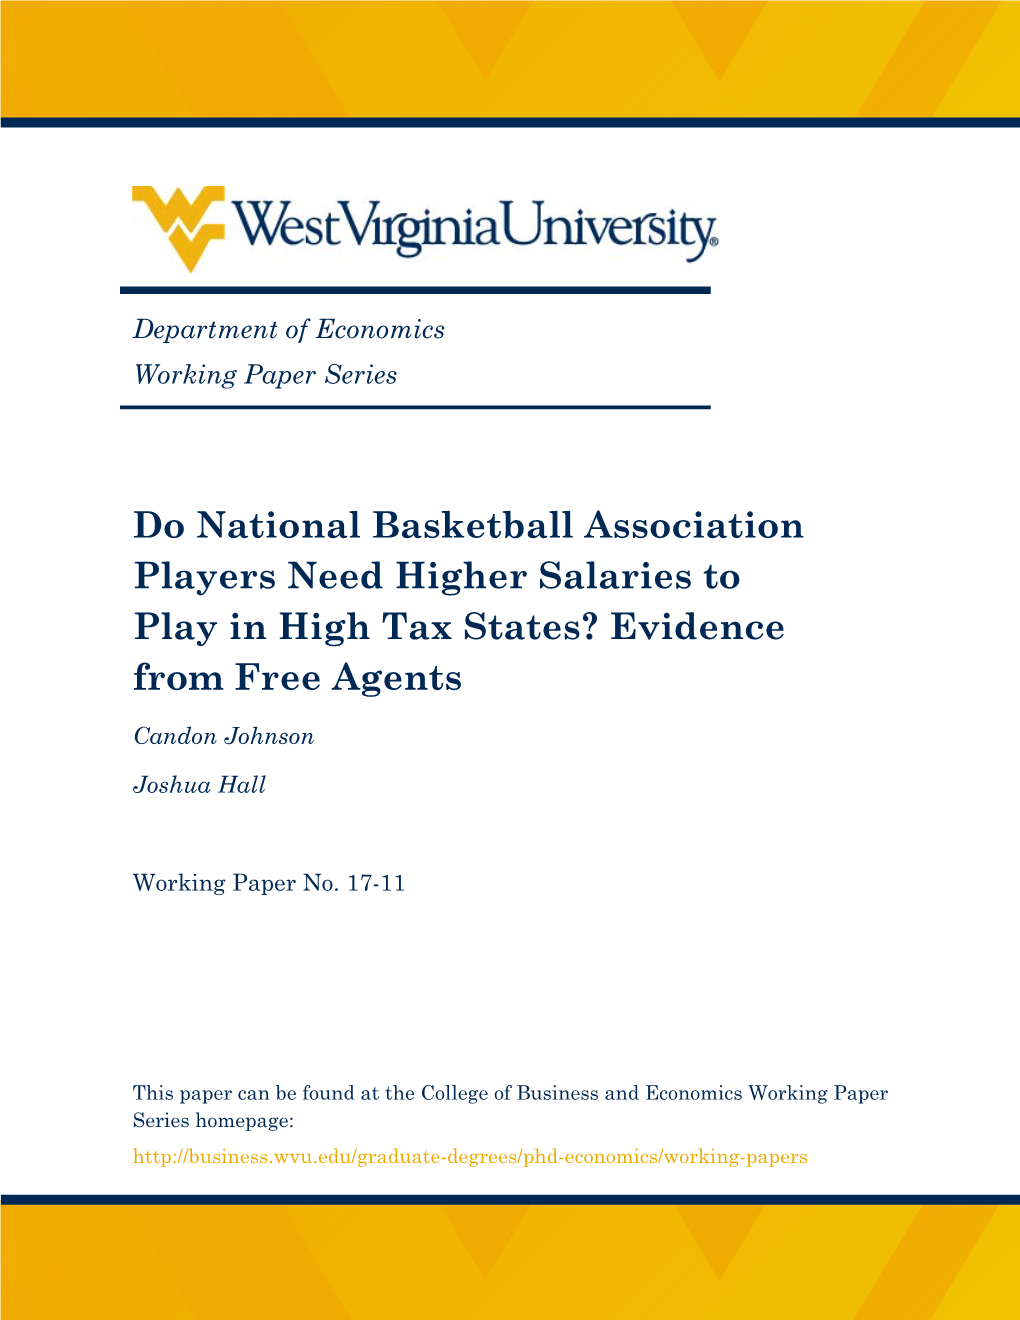 Do National Basketball Association Players Need Higher Salaries to Play in High Tax States? Evidence from Free Agents